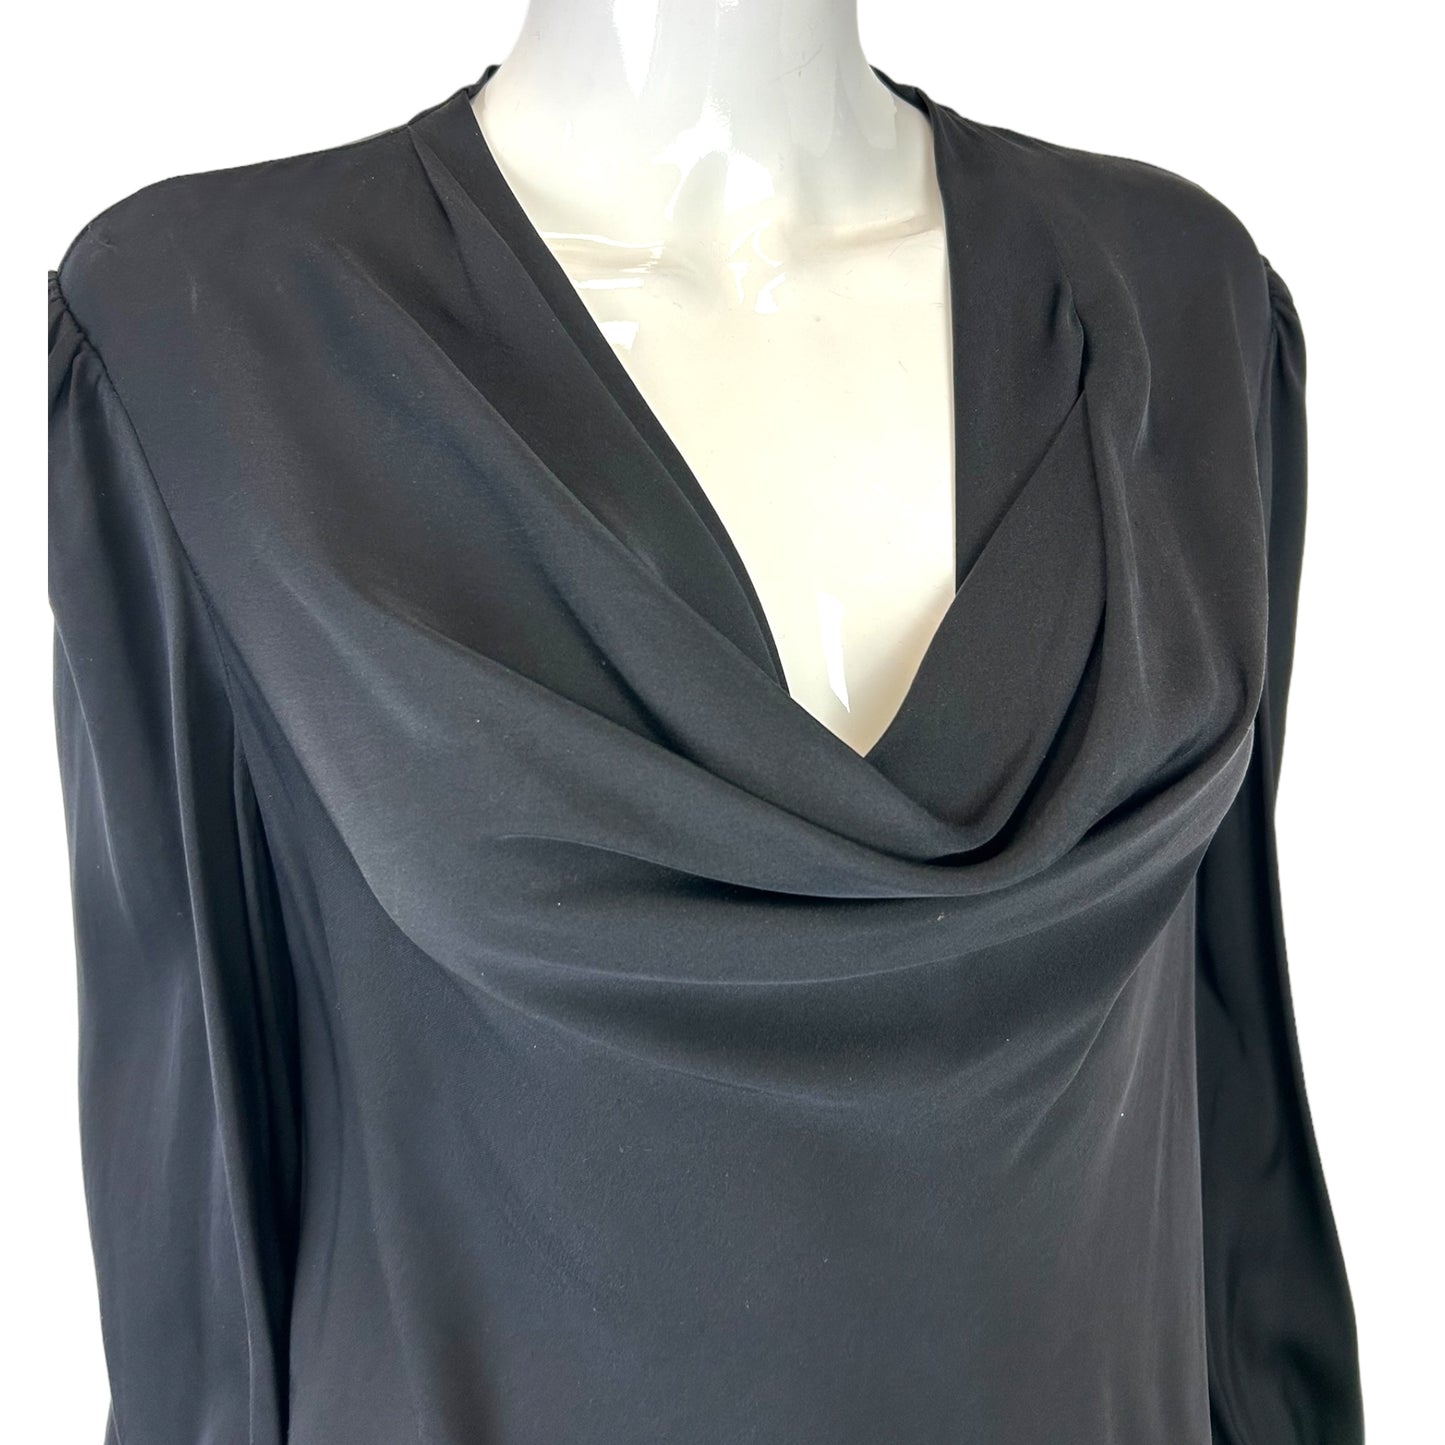 Silk Top Size Large